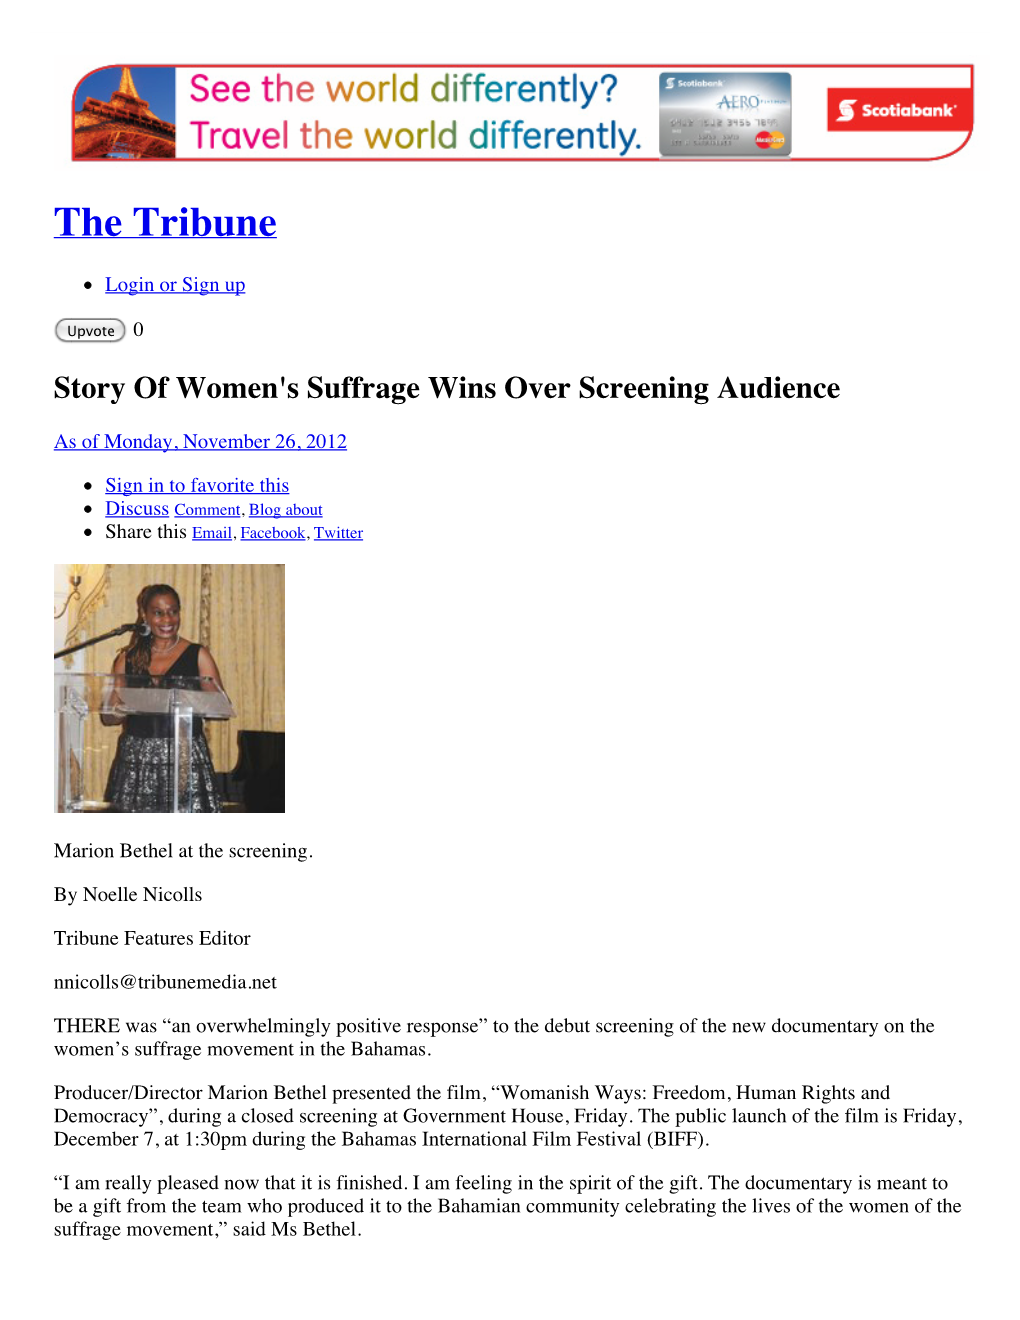 Story of Women's Suffrage Wins Over Screening Audience | the Tribune